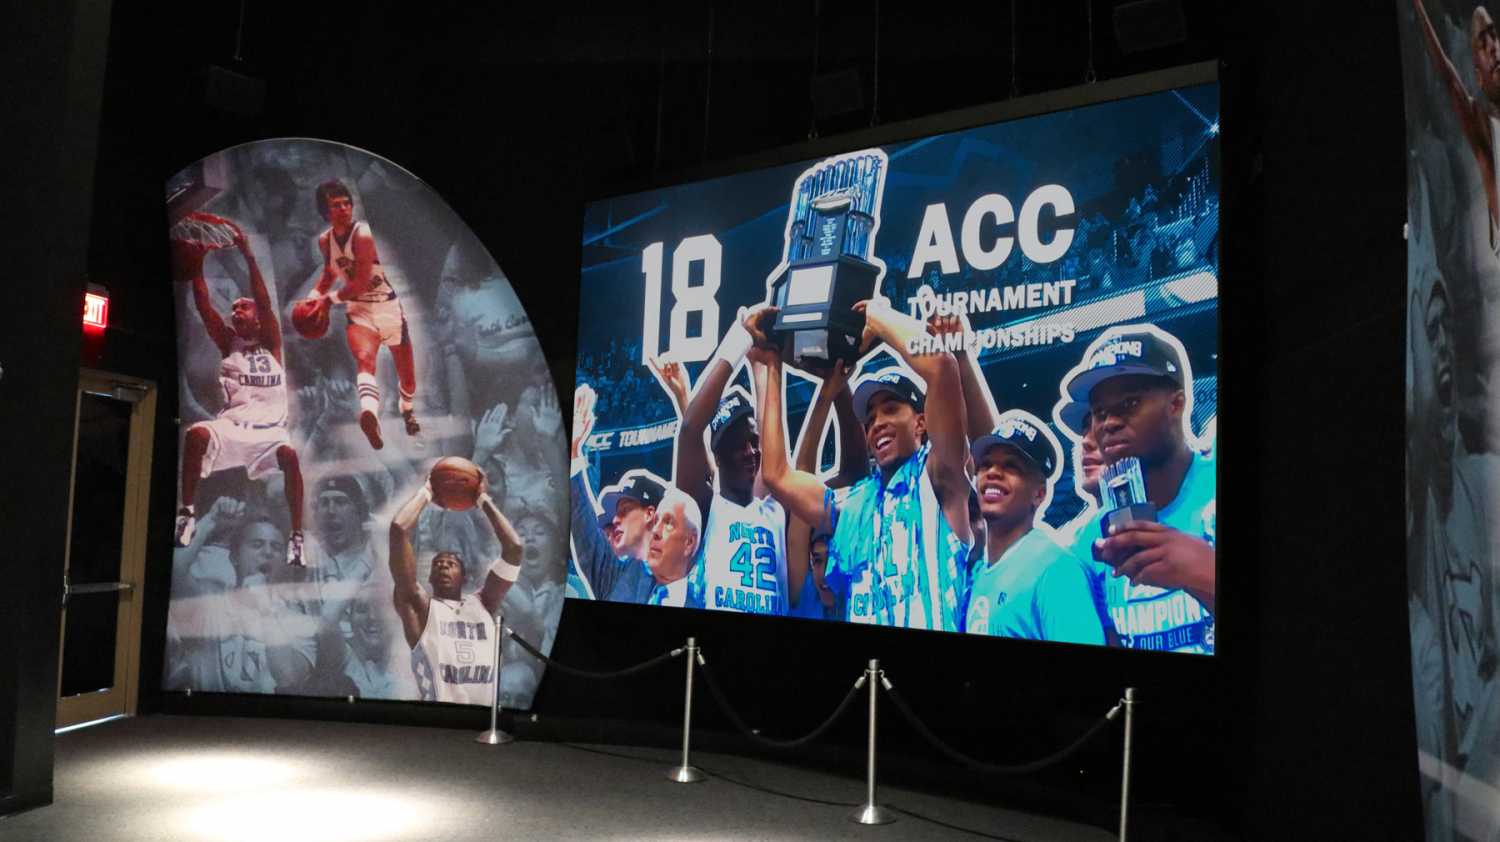 he Carolina Basketball Museum reopened its doors for the start of the 2017-18 season